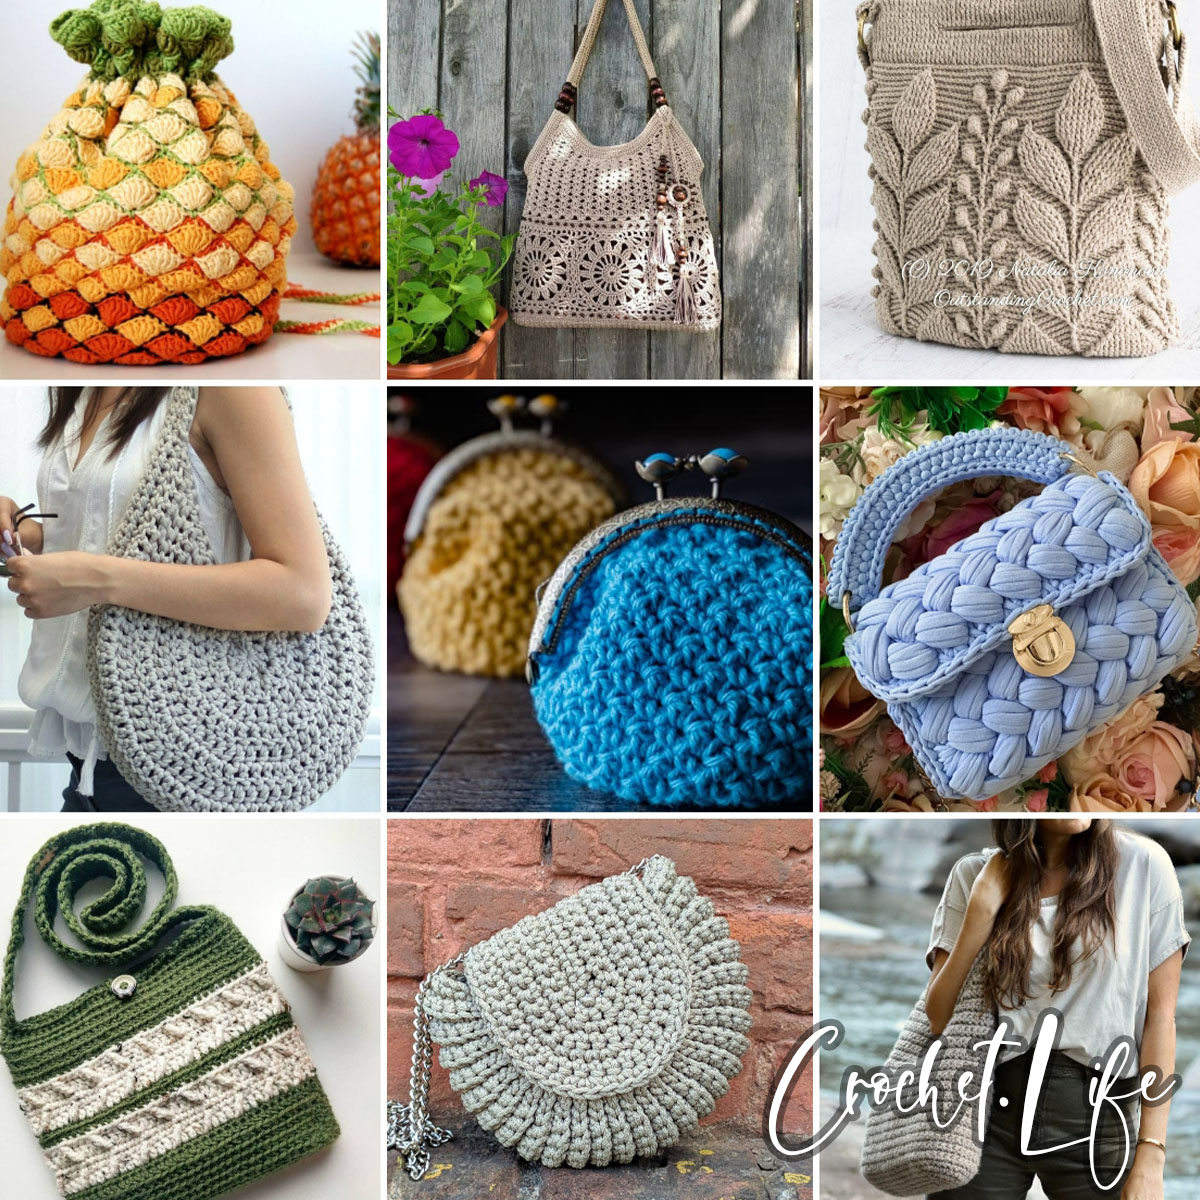 Simple CIRCLE PURSE Tutorial...for Girls! | Make It & Love It